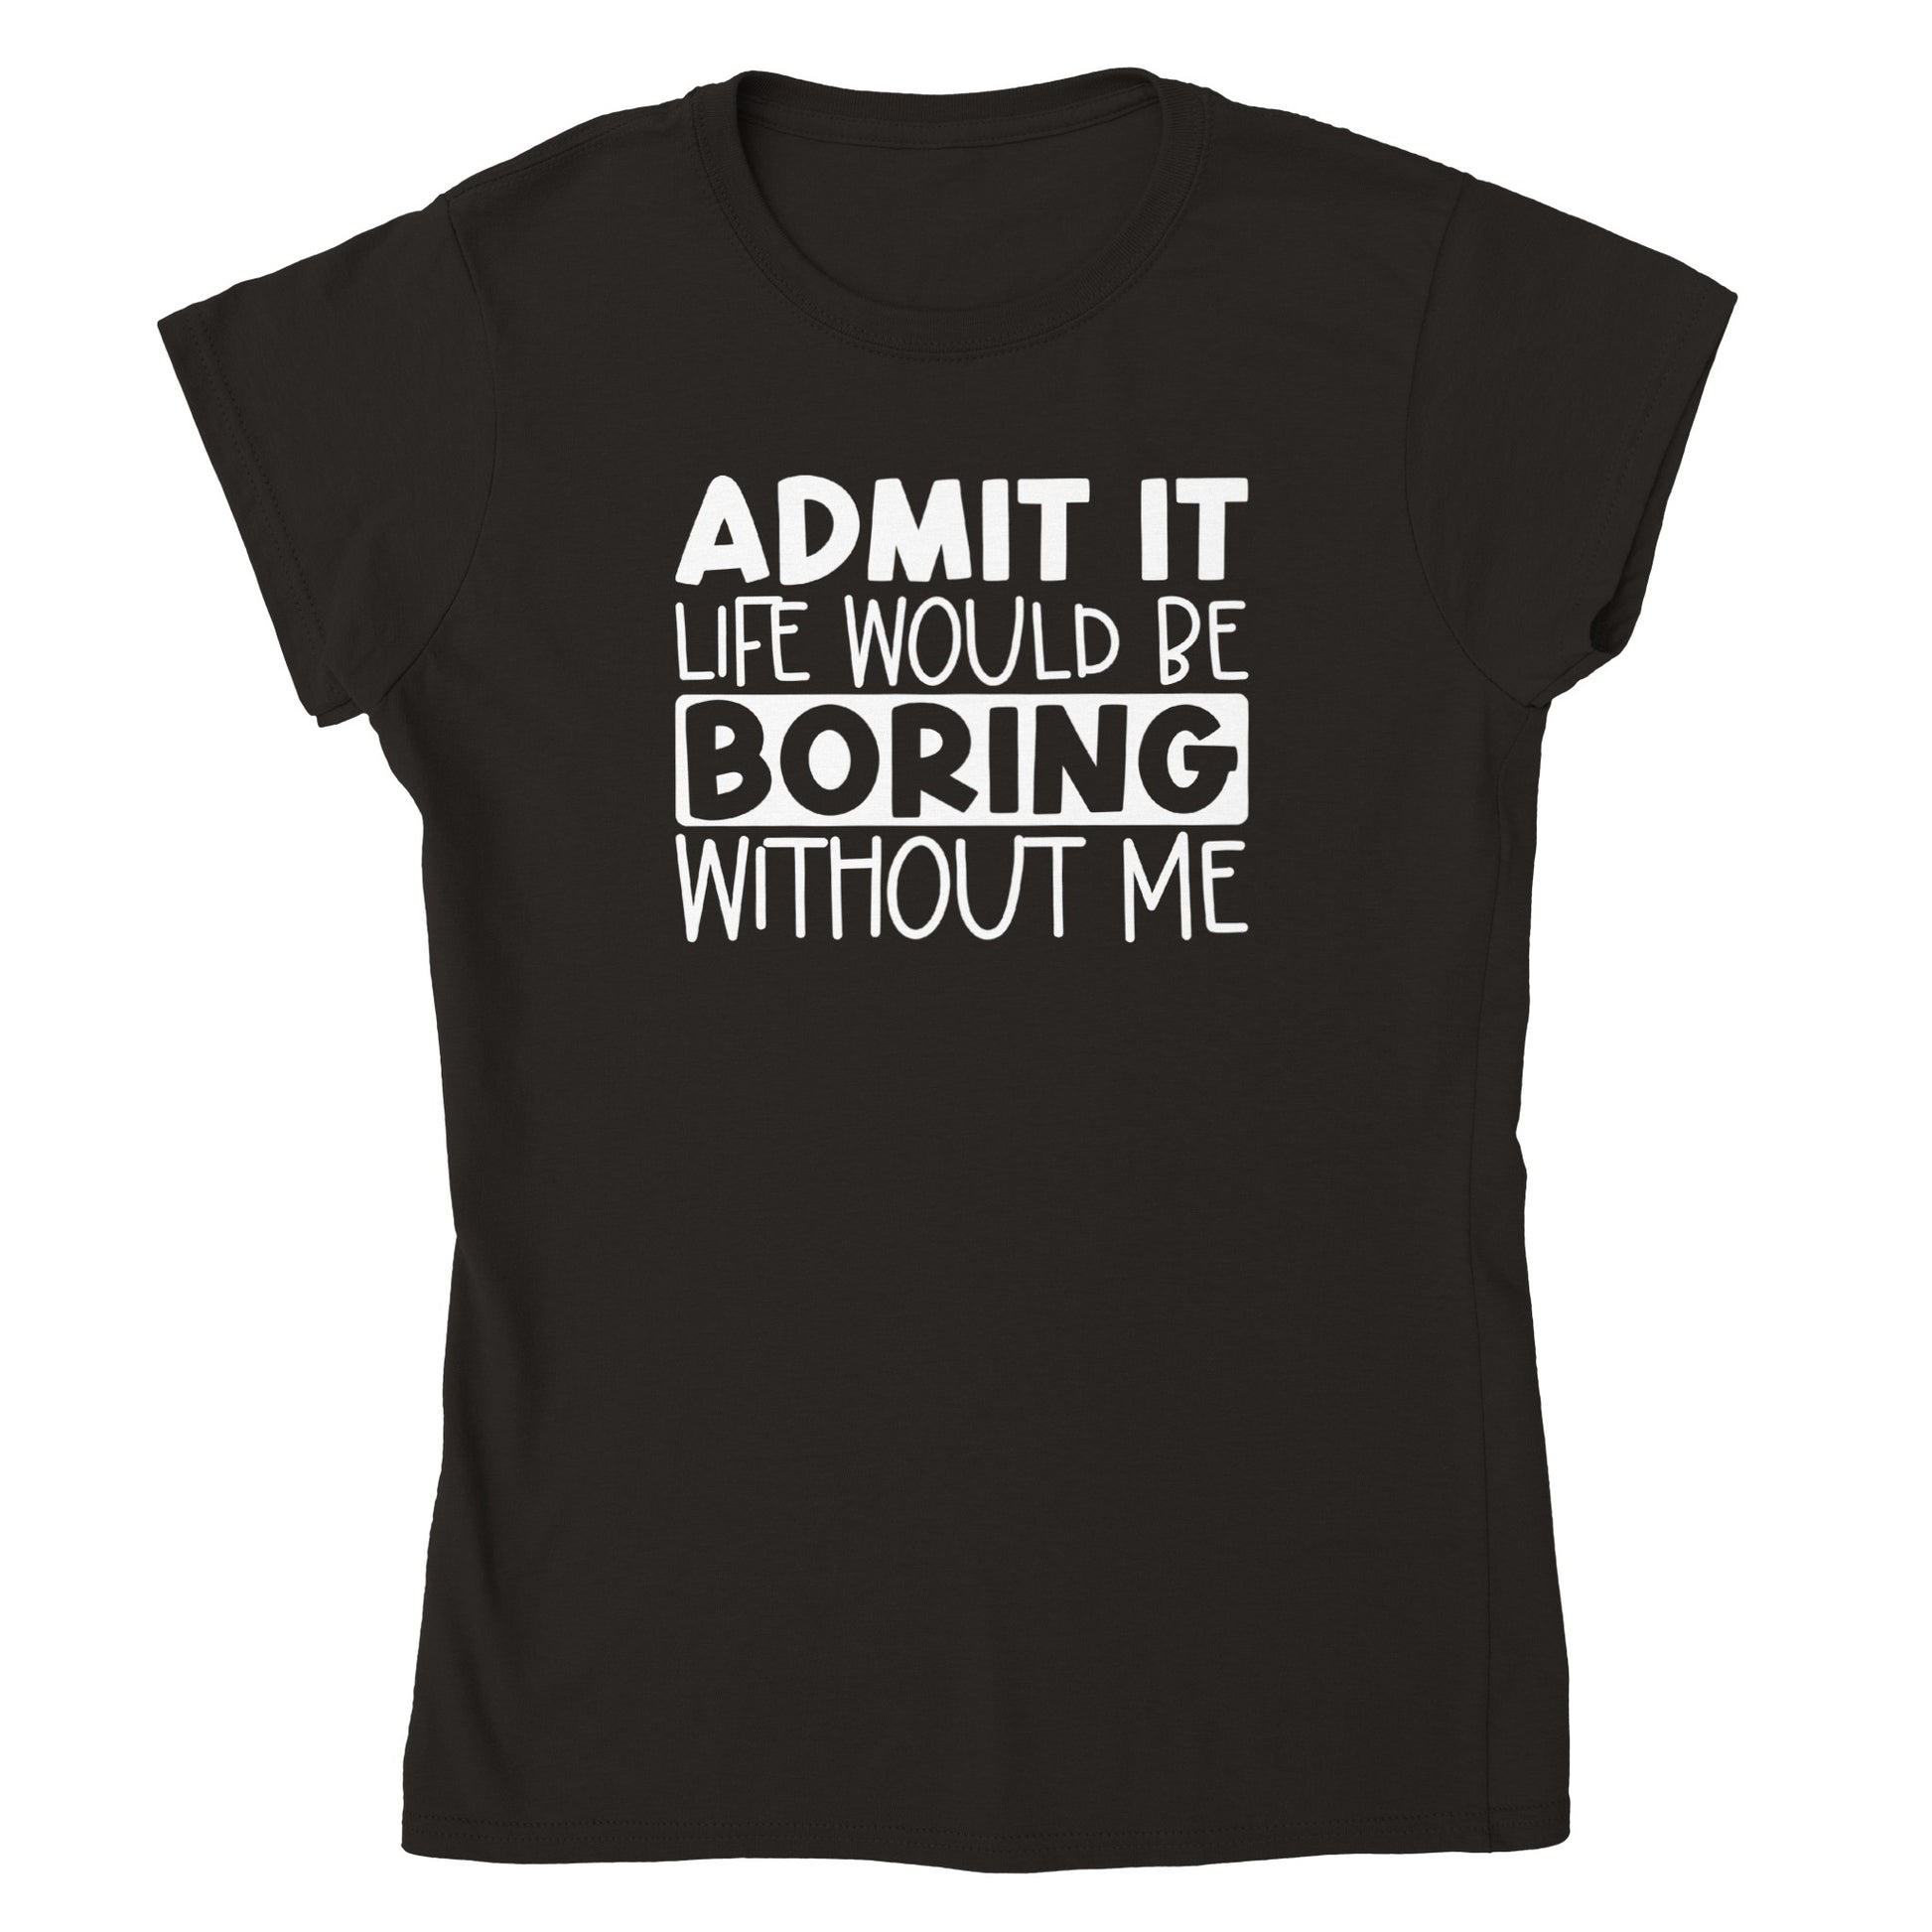 Admit It, Life Would Be Boring Without Me Womens T-shirt - Mister Snarky's